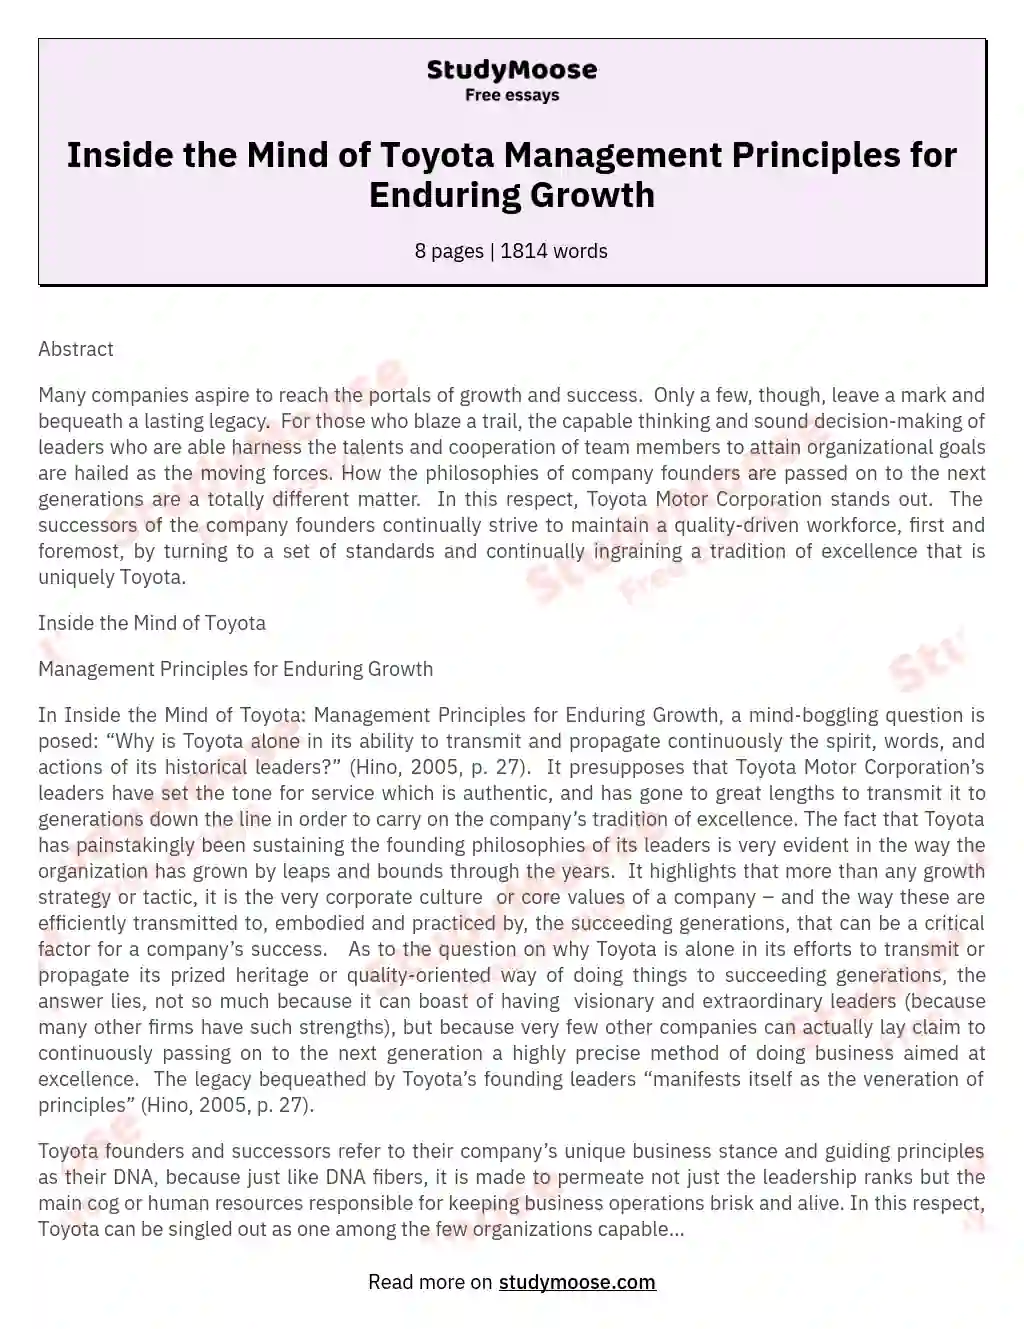 Inside the Mind of Toyota Management Principles for Enduring Growth essay